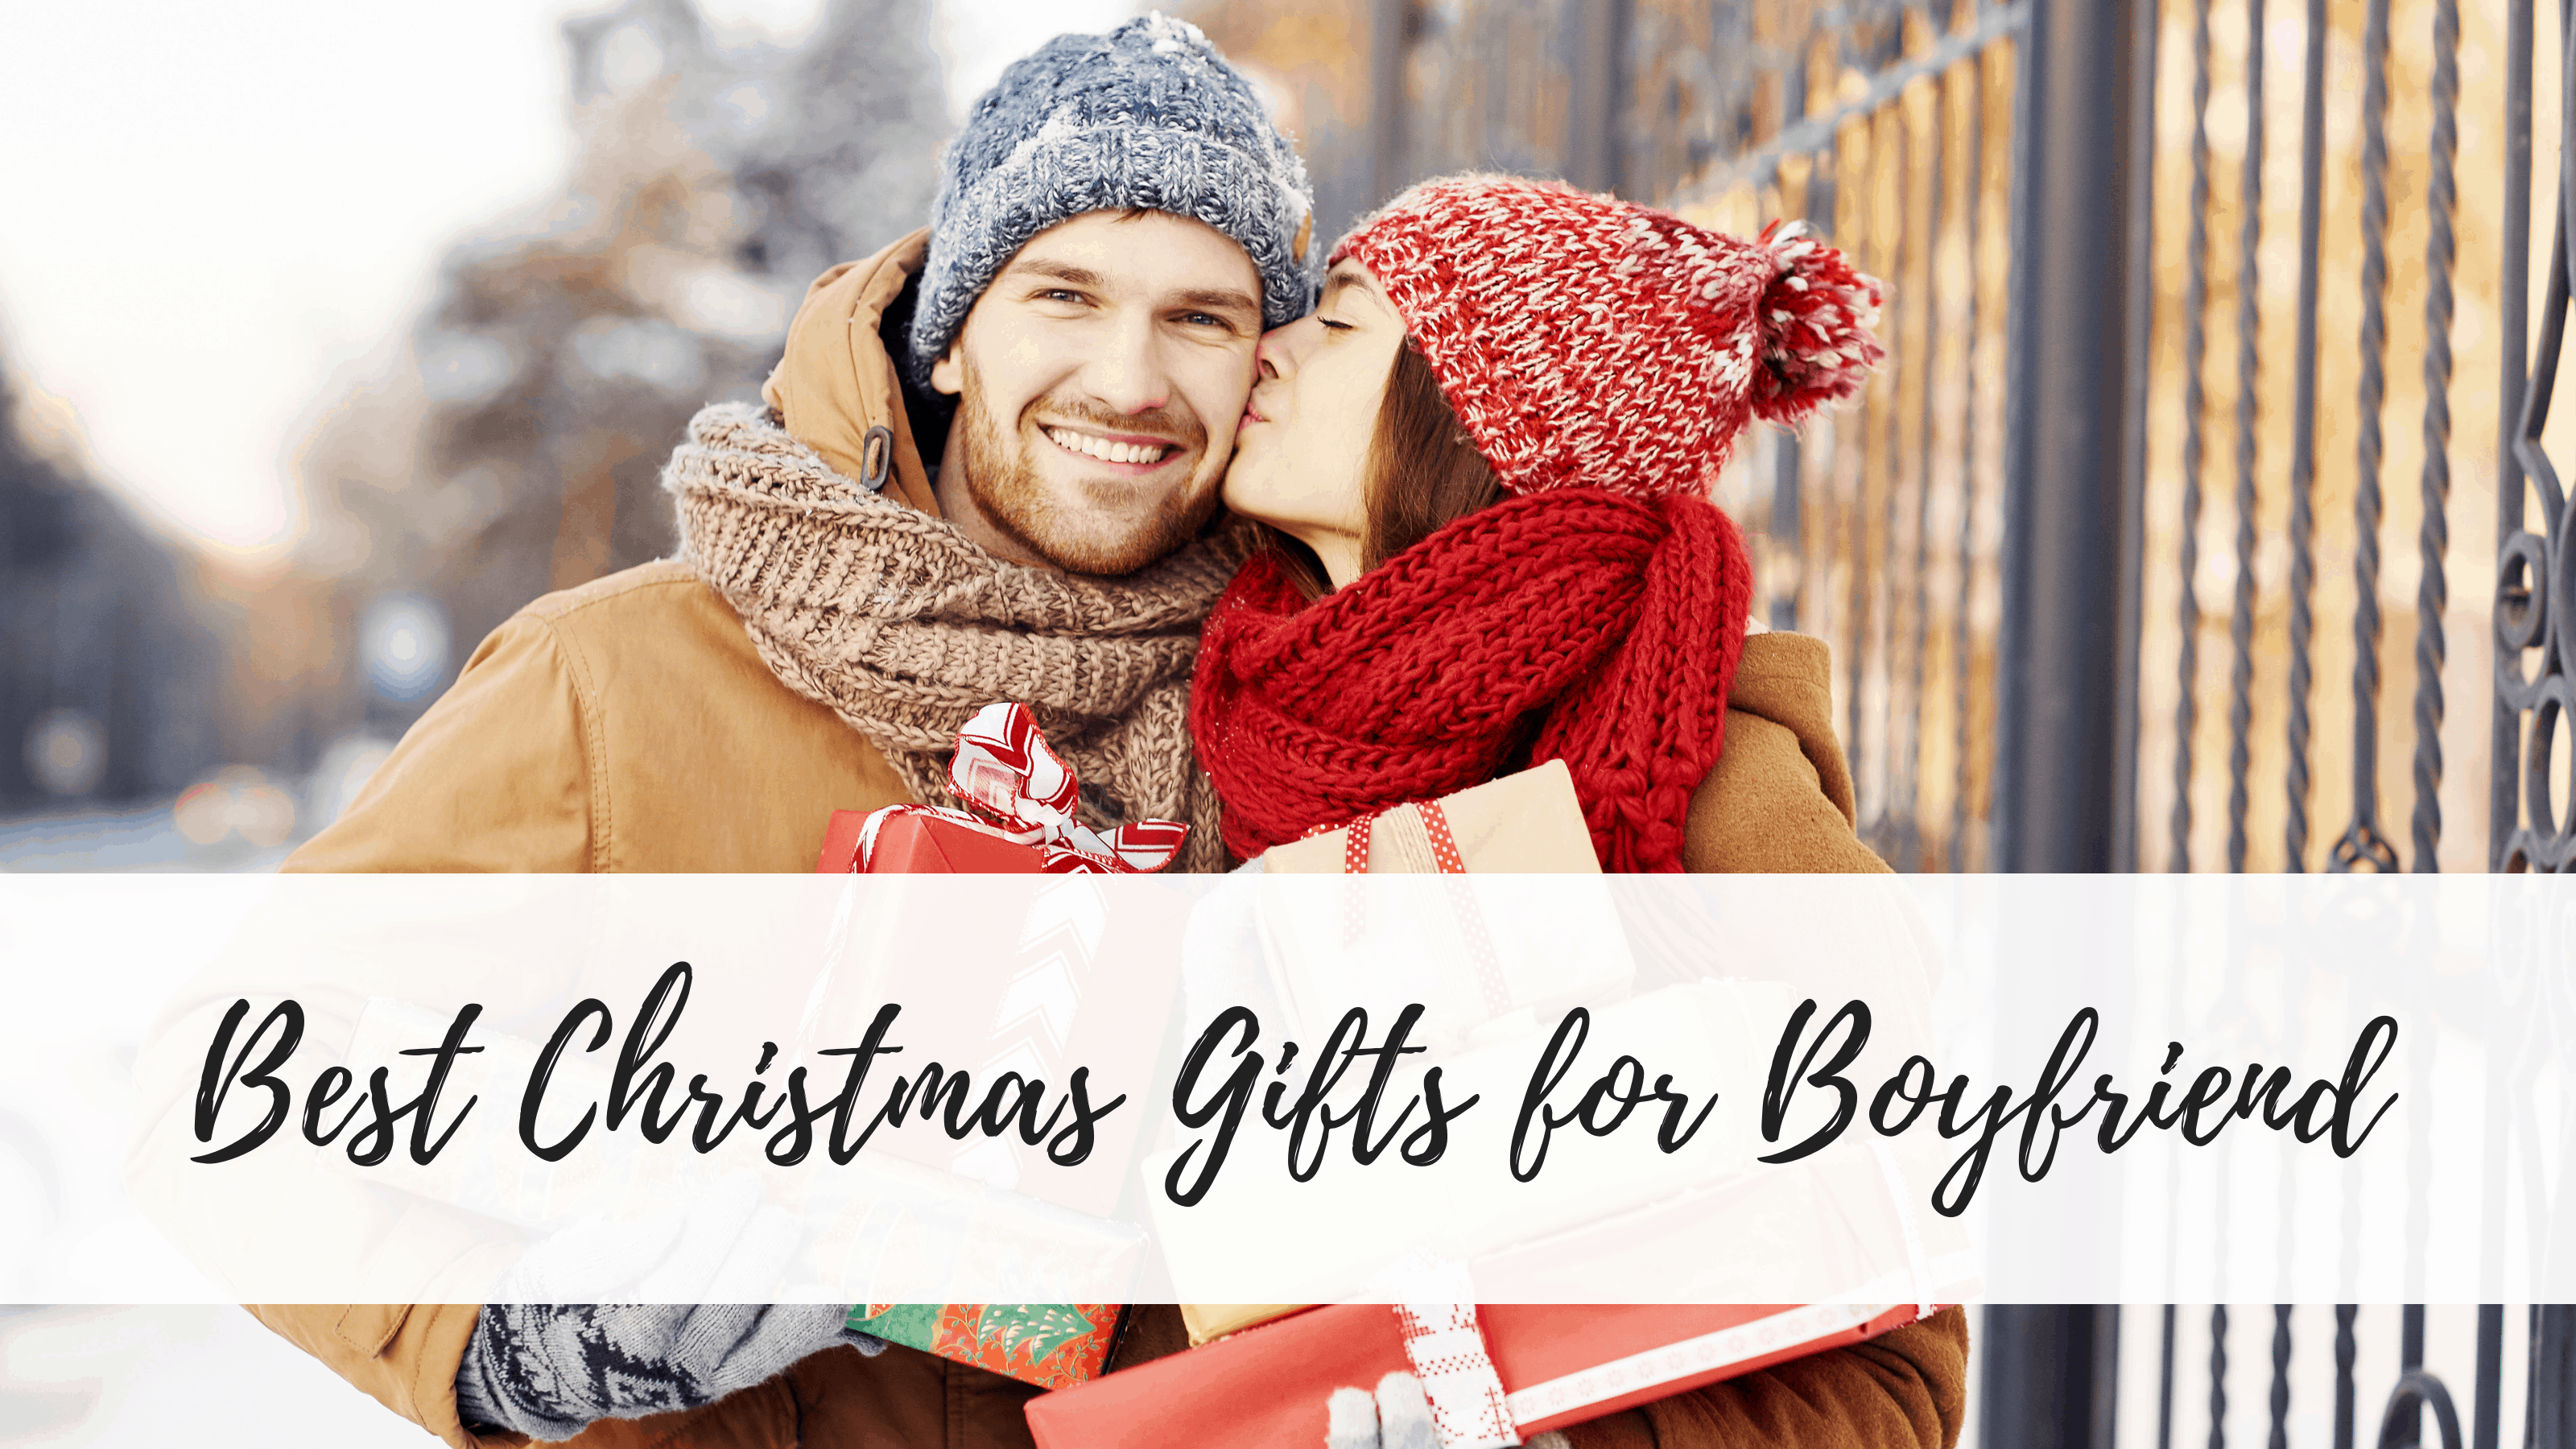 37 Insanely Good Christmas Gifts For Boyfriend This Year - By Sophia Lee